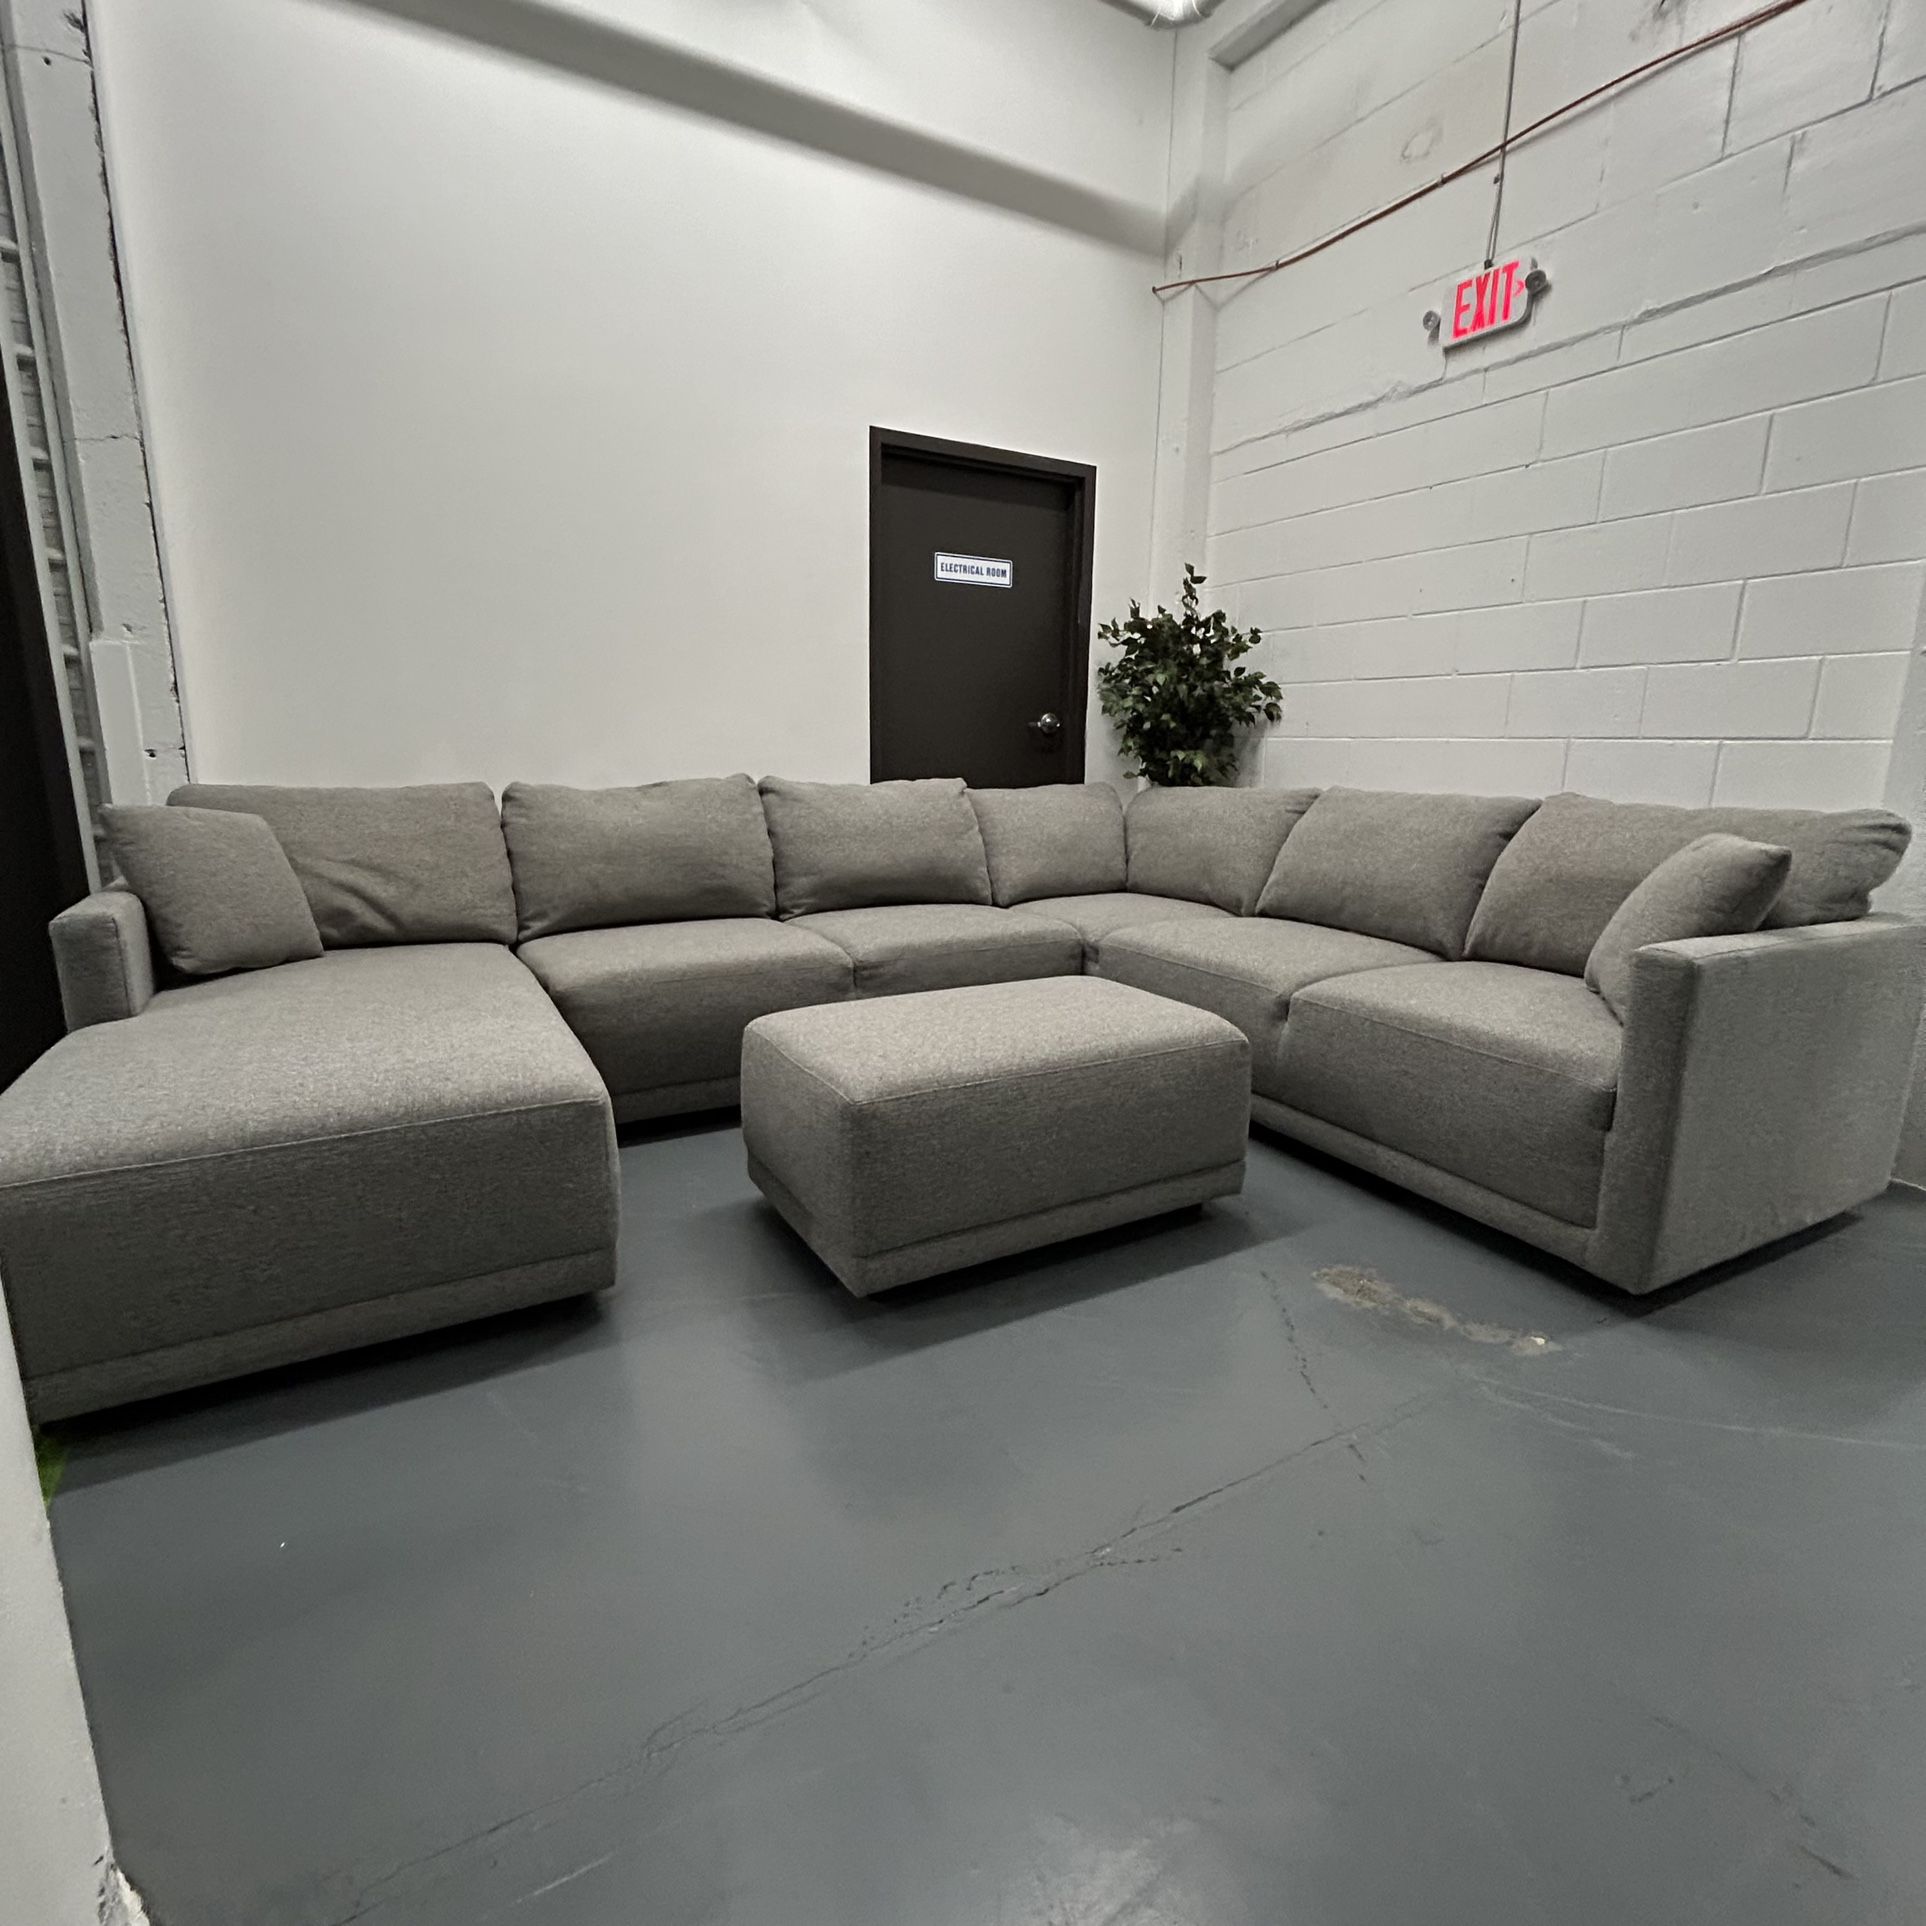 FREE DELIVERY - NEW Thomasville Cayson Fabric Sectional with Ottoman - Gray